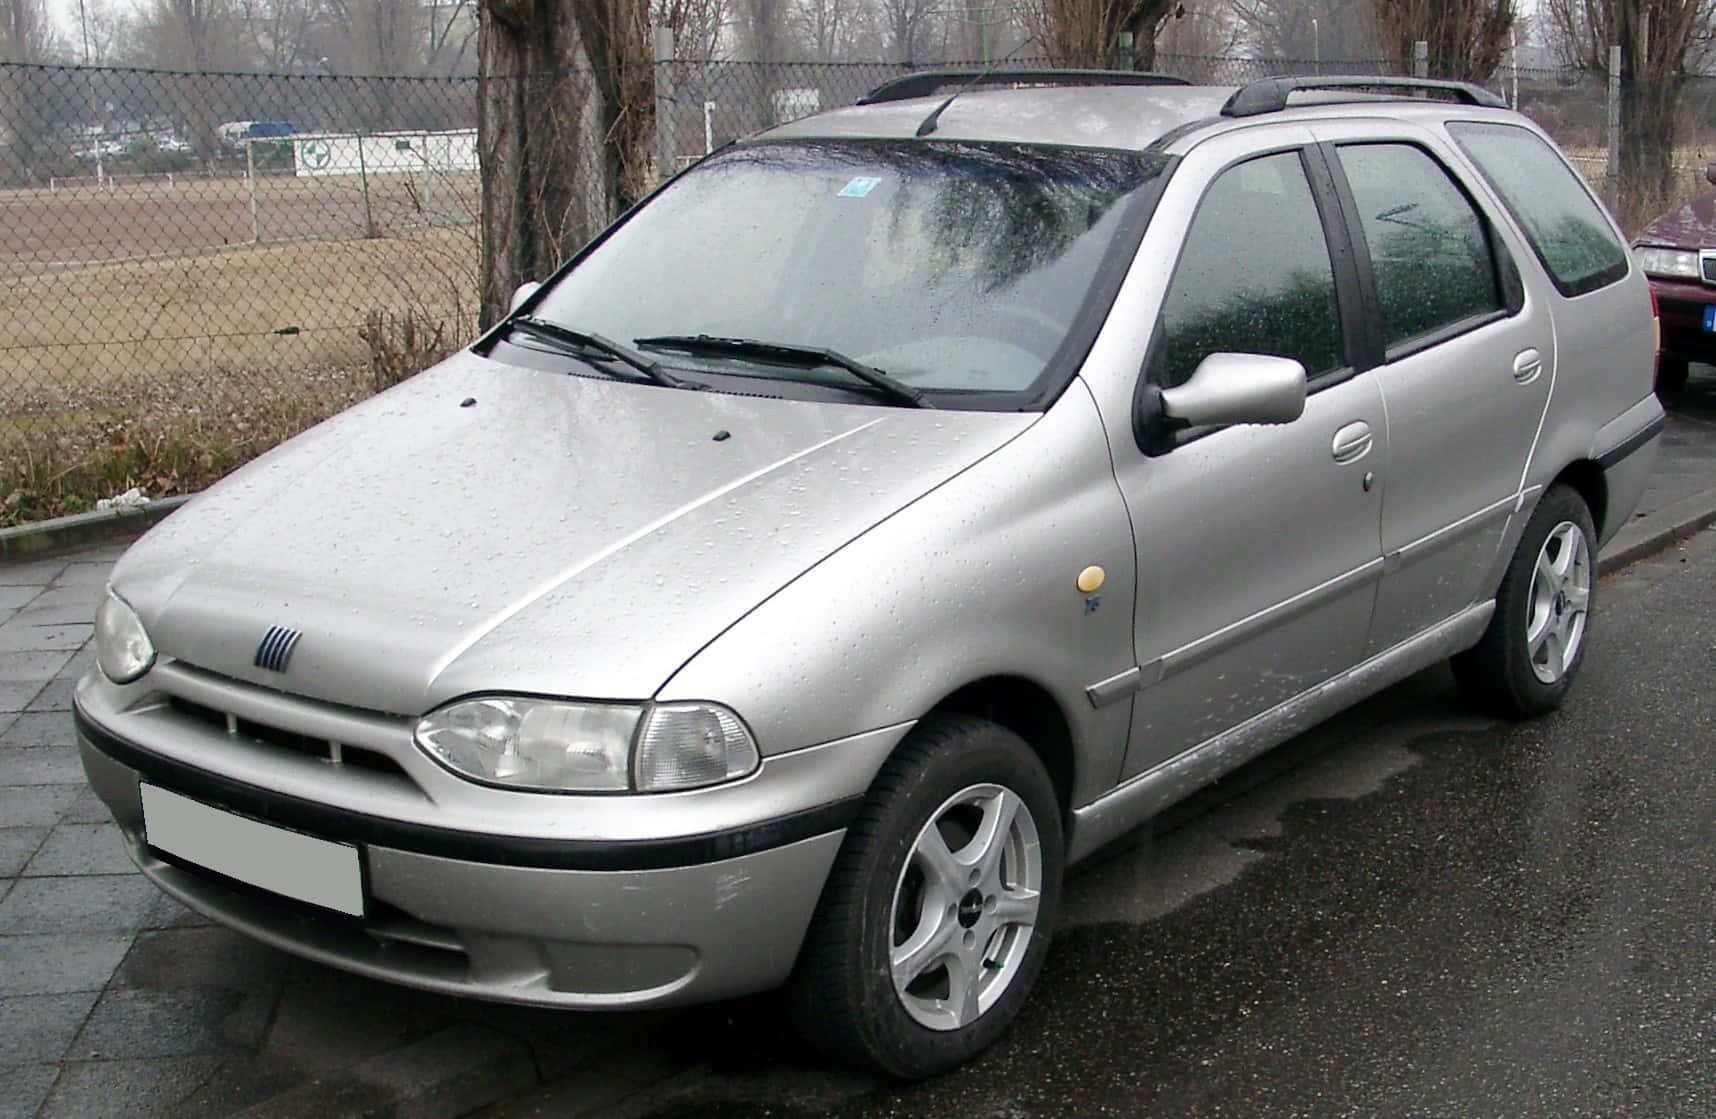 Caption: Fiat Palio - Compact Hatchback for the City Wallpaper